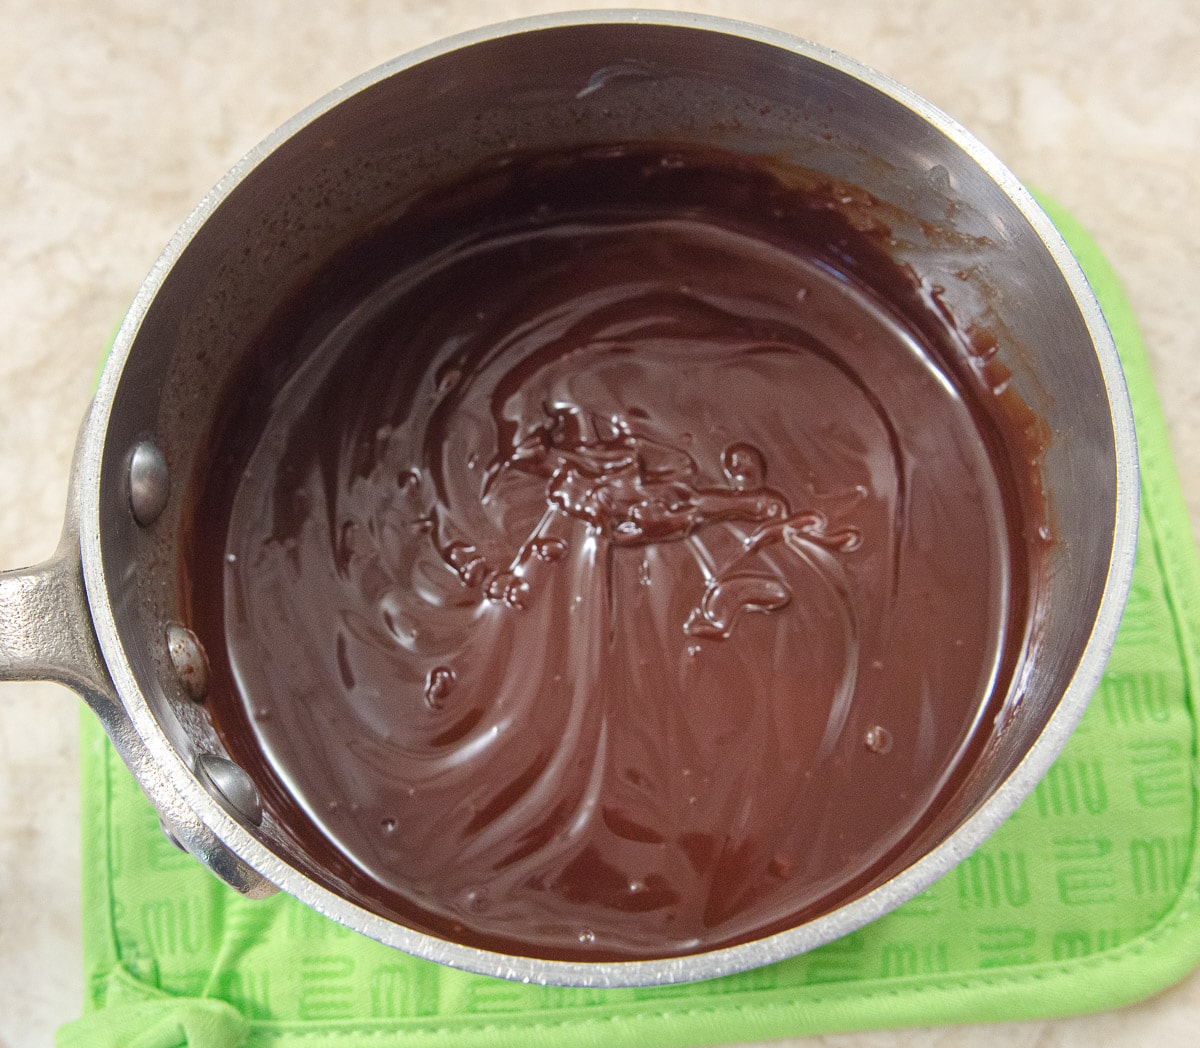 The dark chocolate truffle filling is smooth and ready to fill the tart shells.